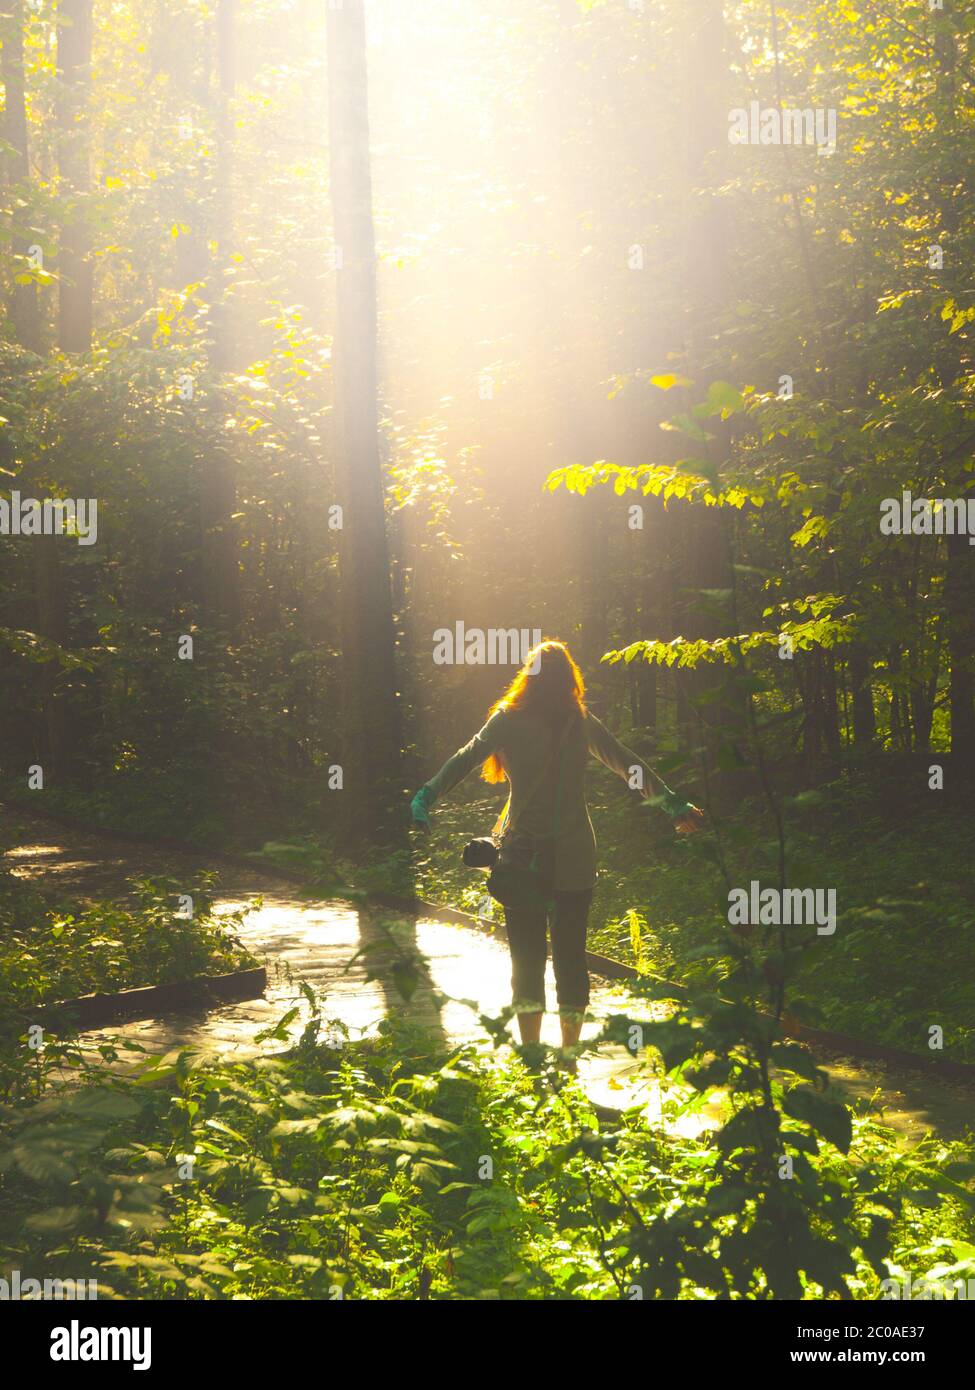 Faithful woman thanking god with open arms in nature illuminated by bright light shining from heaven. Praying and faith concept. Stock Photo